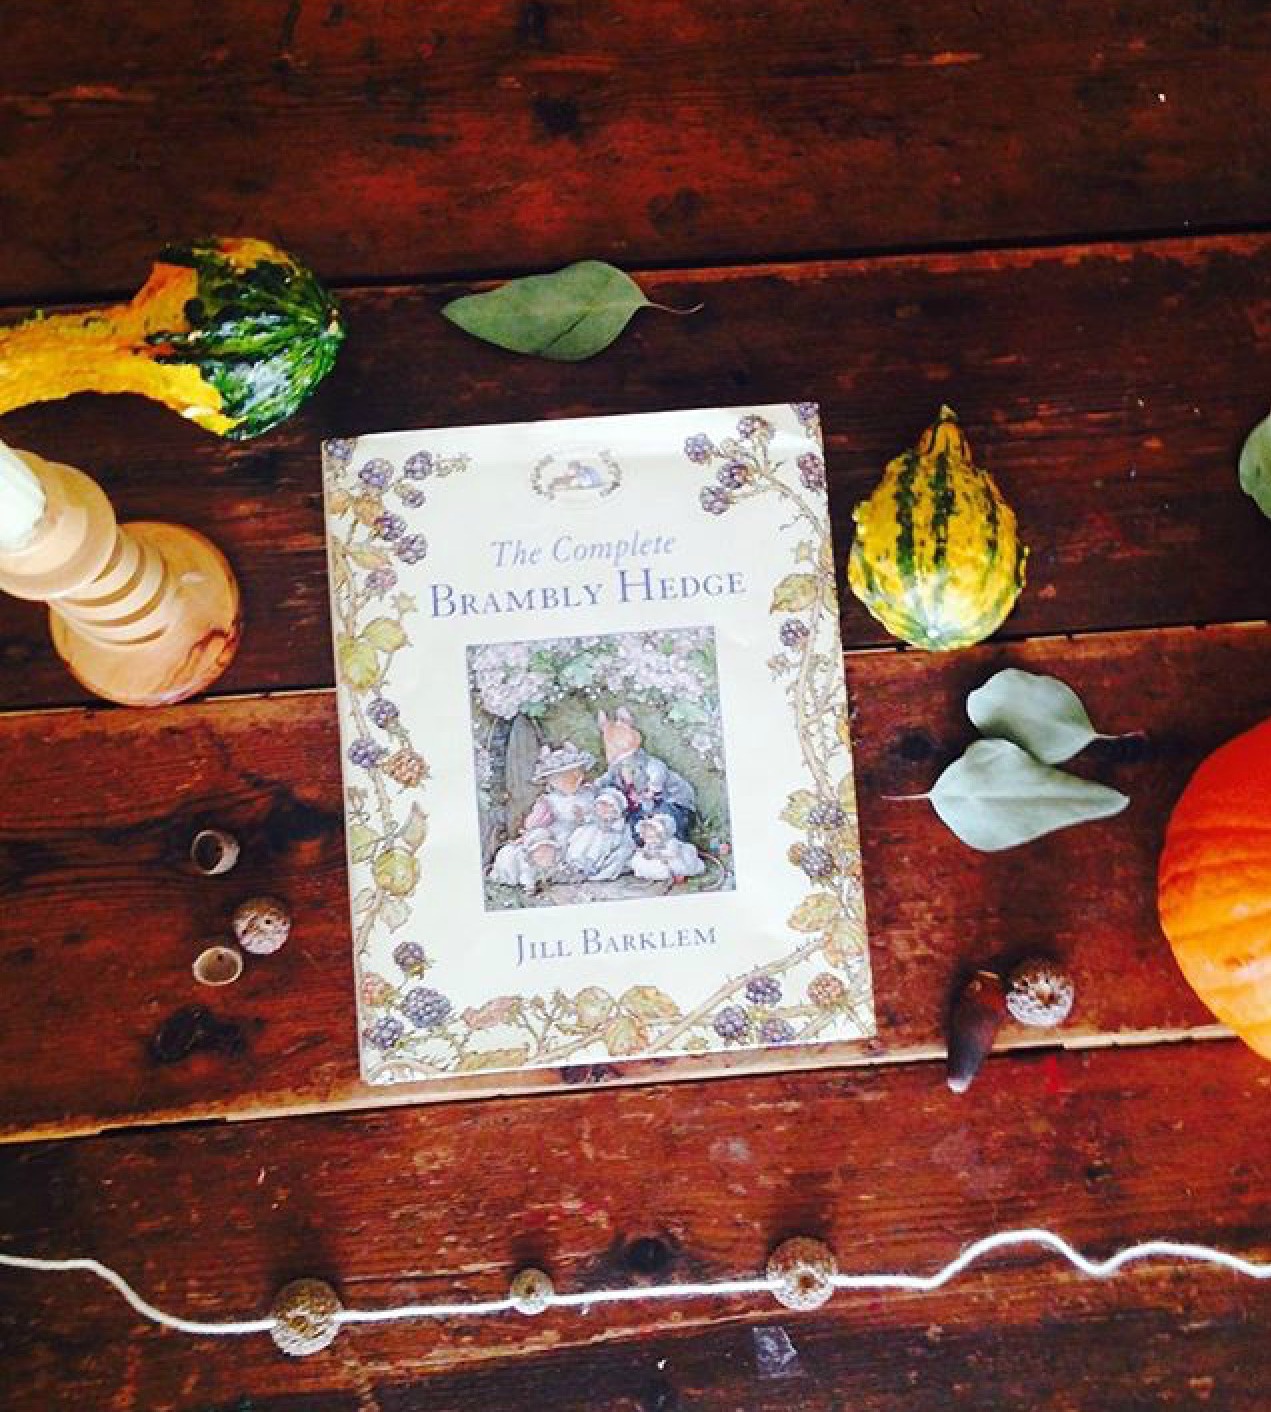 Charming pictures, engaging tales, all a children's book should be: Brambly Hedge is a welcome addition to any children's bookshelf.